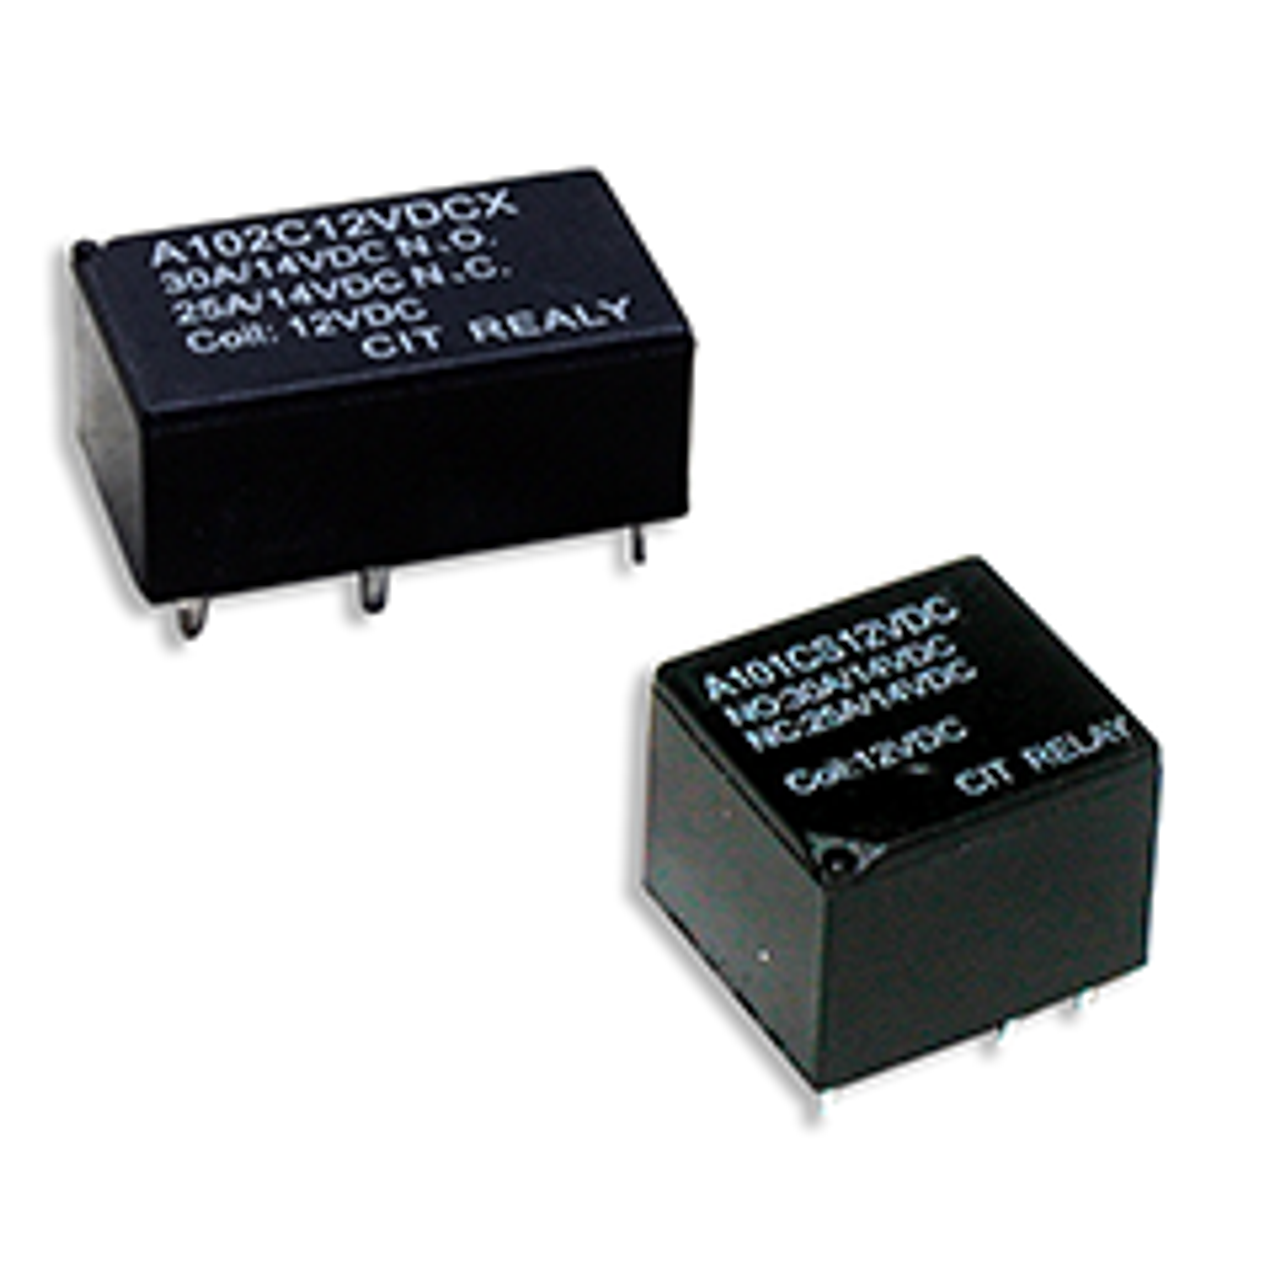 CIT Relay and Switch A102AS12VDC Automotive Relays